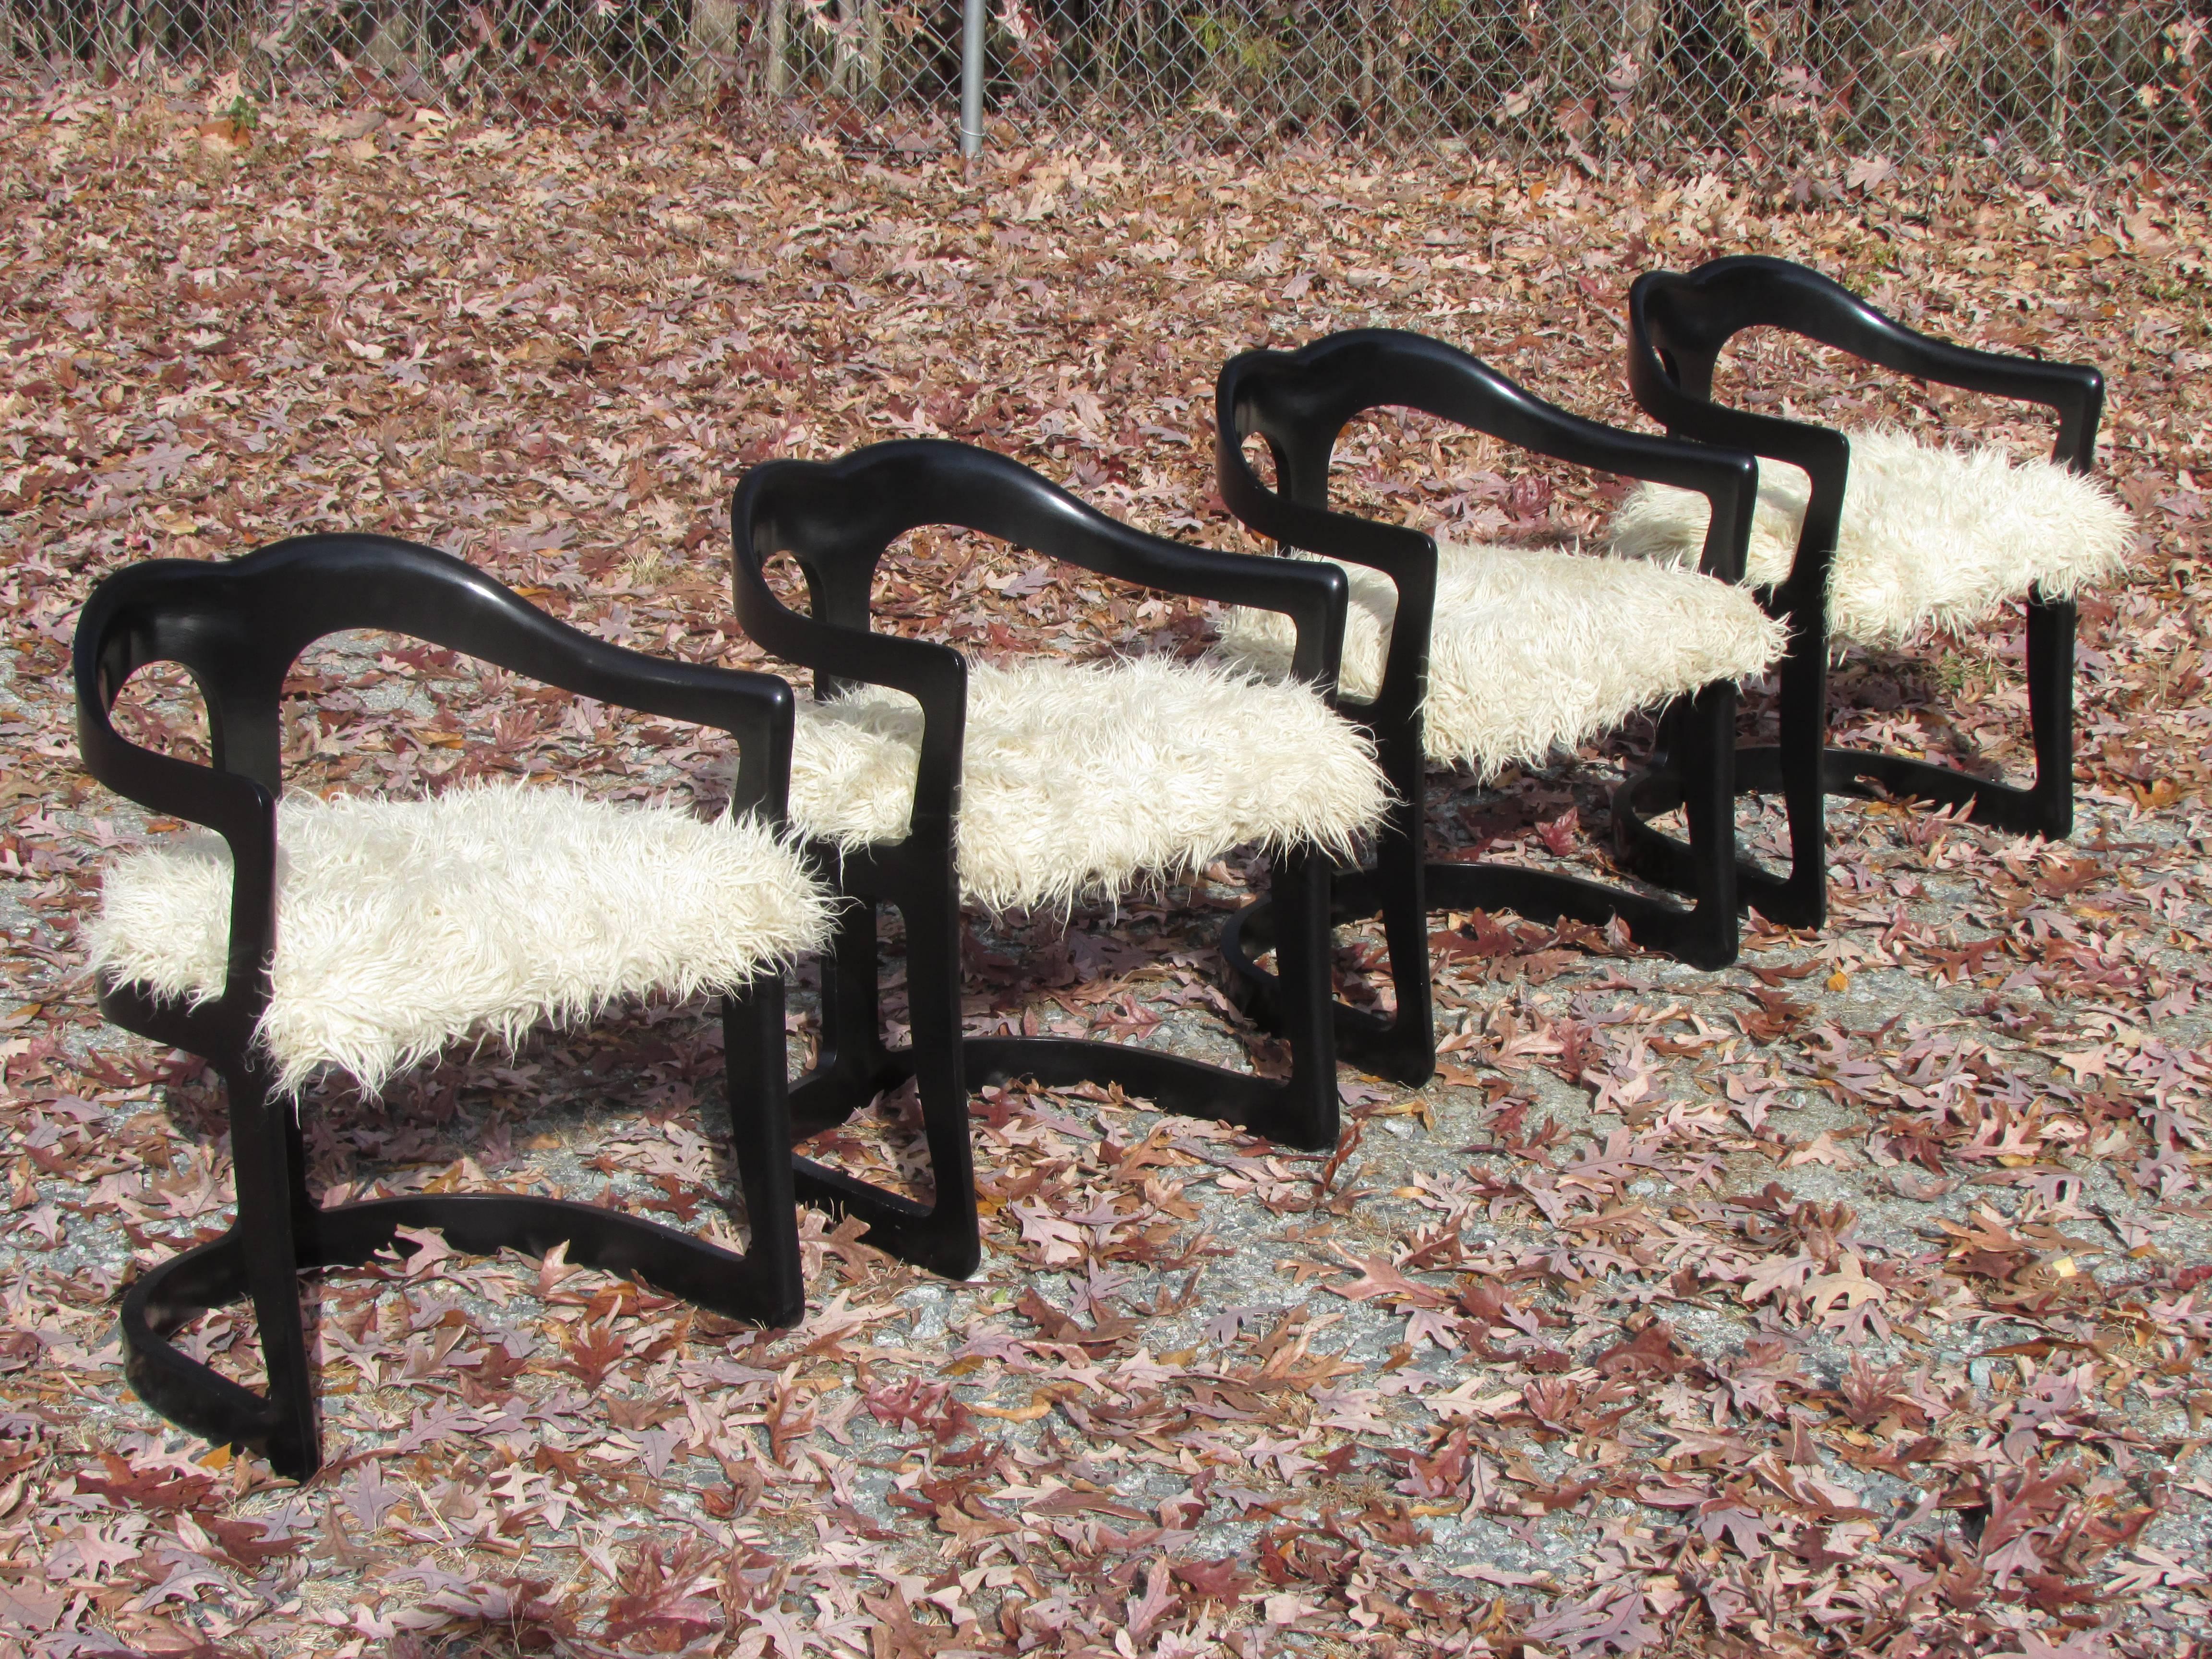 Set of four black enameled chairs with rounded backs with flokati upholstered seats by Broyhill.